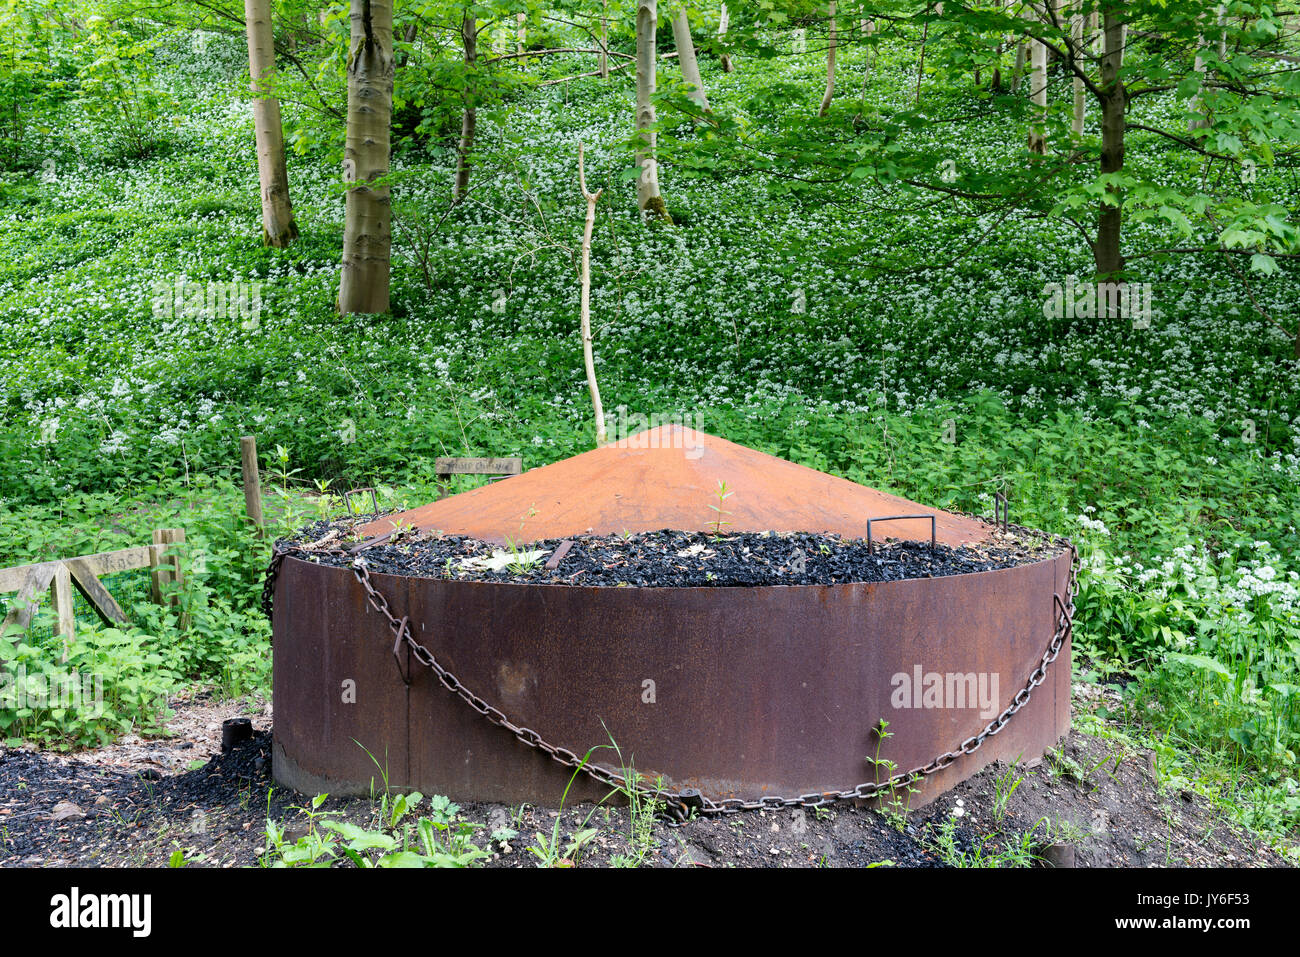 Charcoal burner and wild garlic in Millington woods Stock Photo